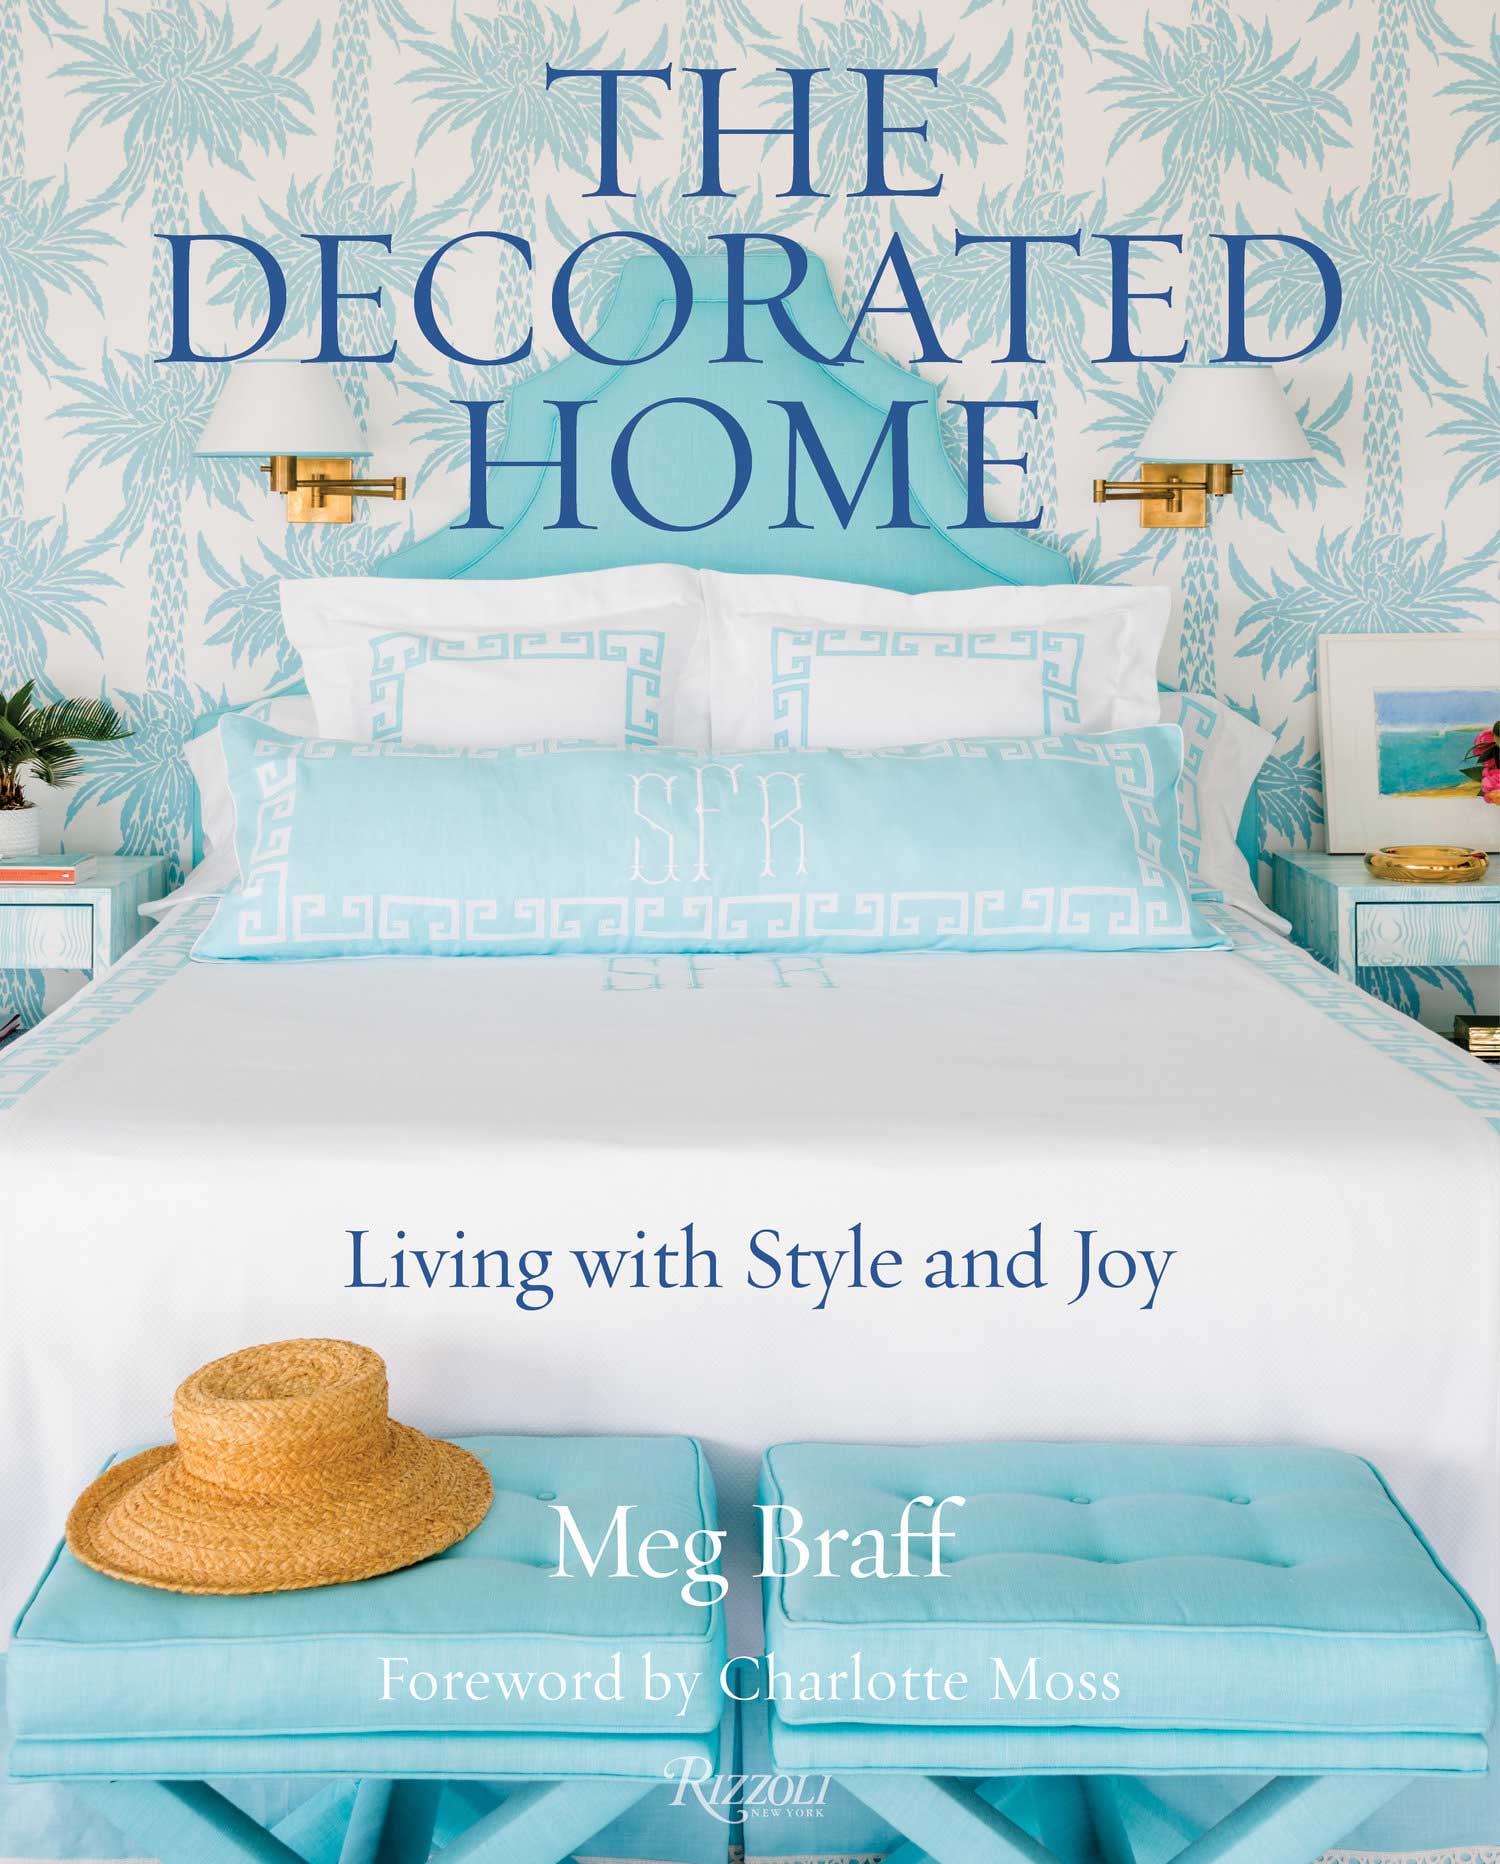 The Decorated Home book cover